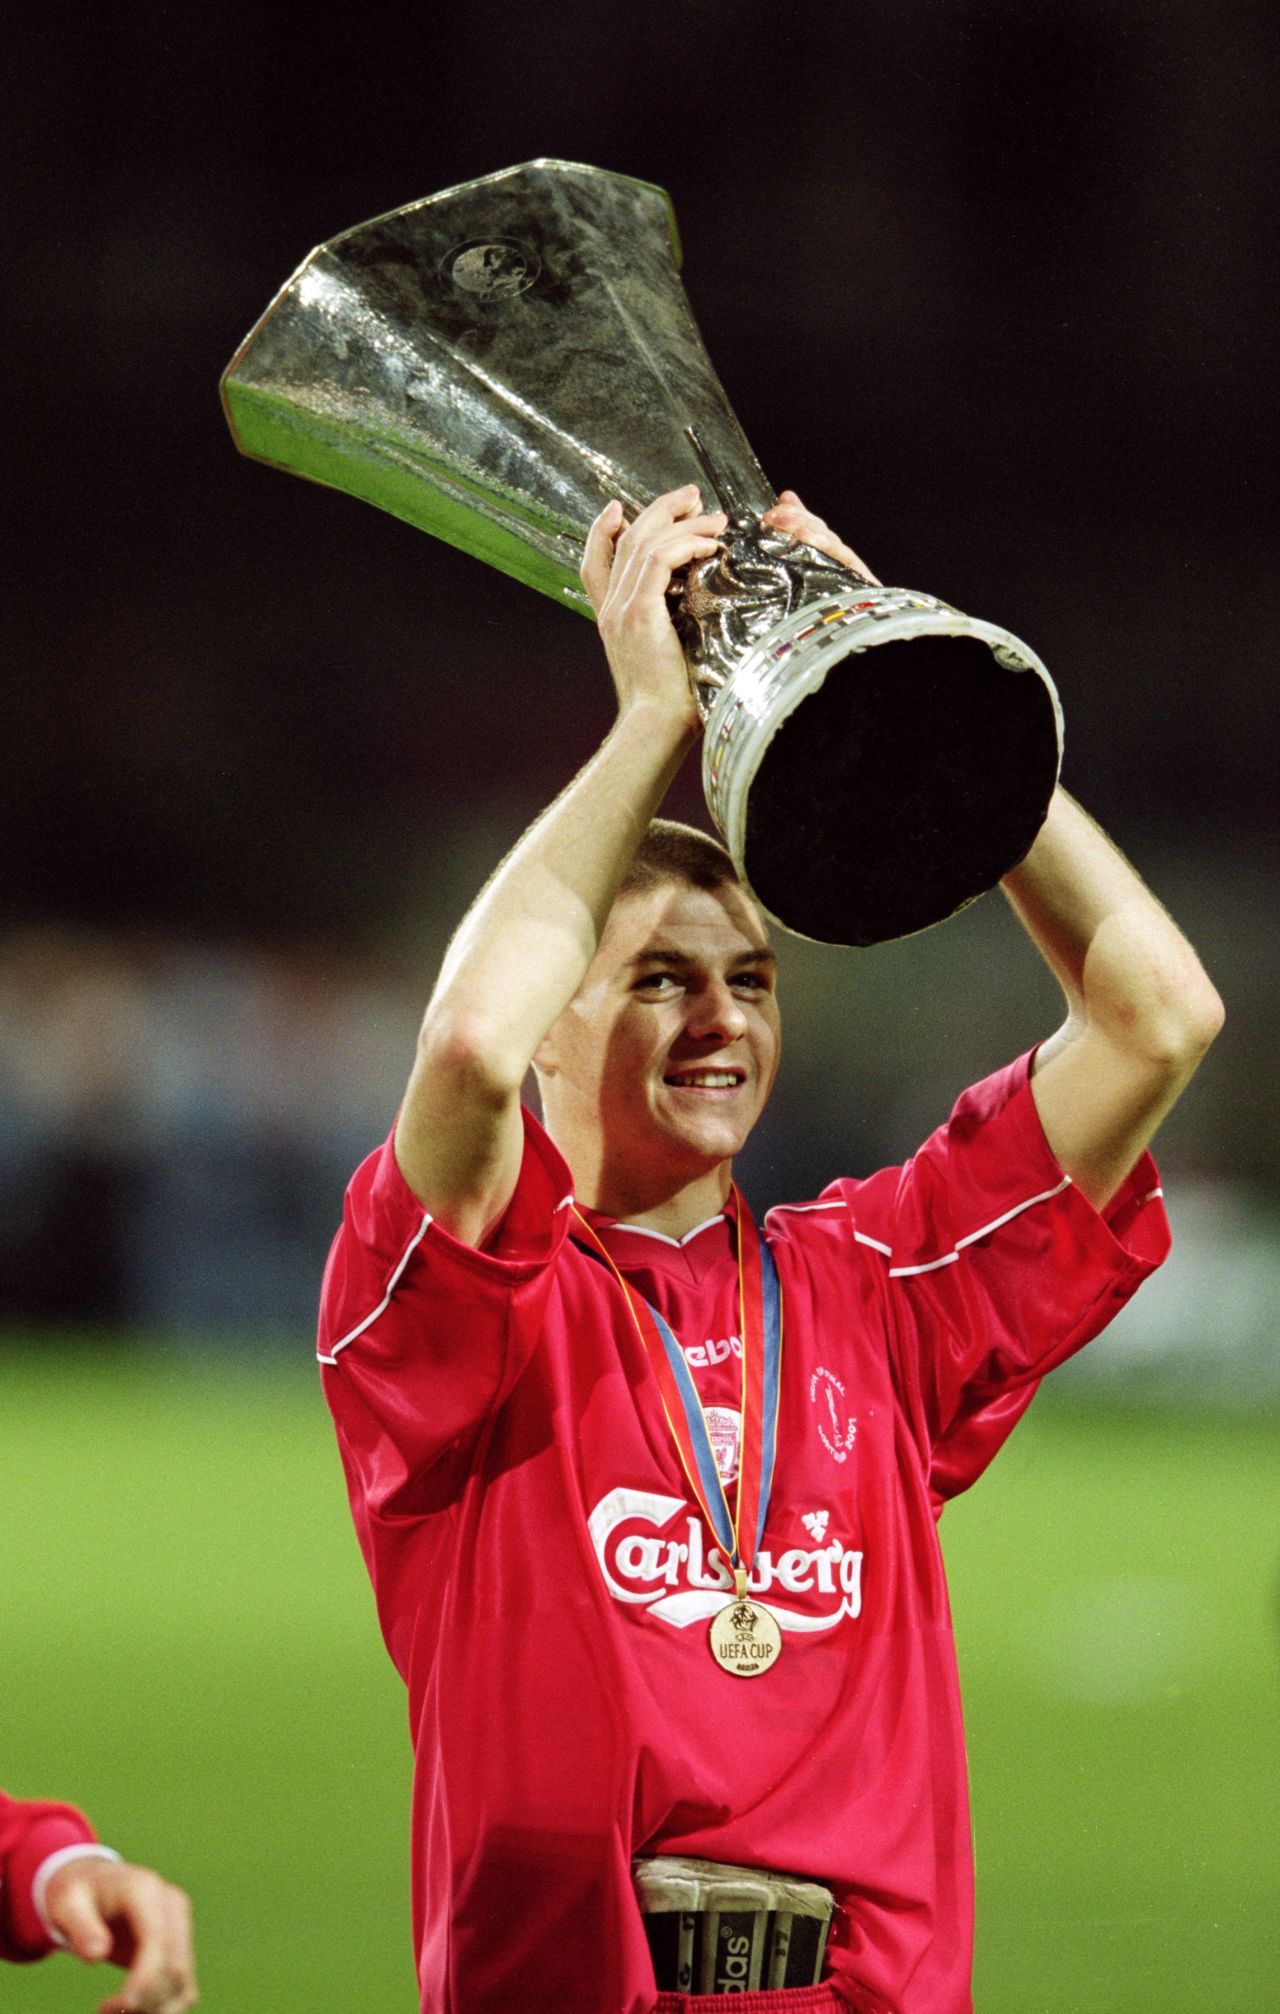 Gerrard won eight trophies with Liverpool, including two FA Cups, three League Cups and the UEFA Cup (pictured) in 2001. A much-coveted Premier League title remains elusive although the Reds came close to winning in 2009 under coach Rafa Benitez and last season under Brendan Rodgers.  